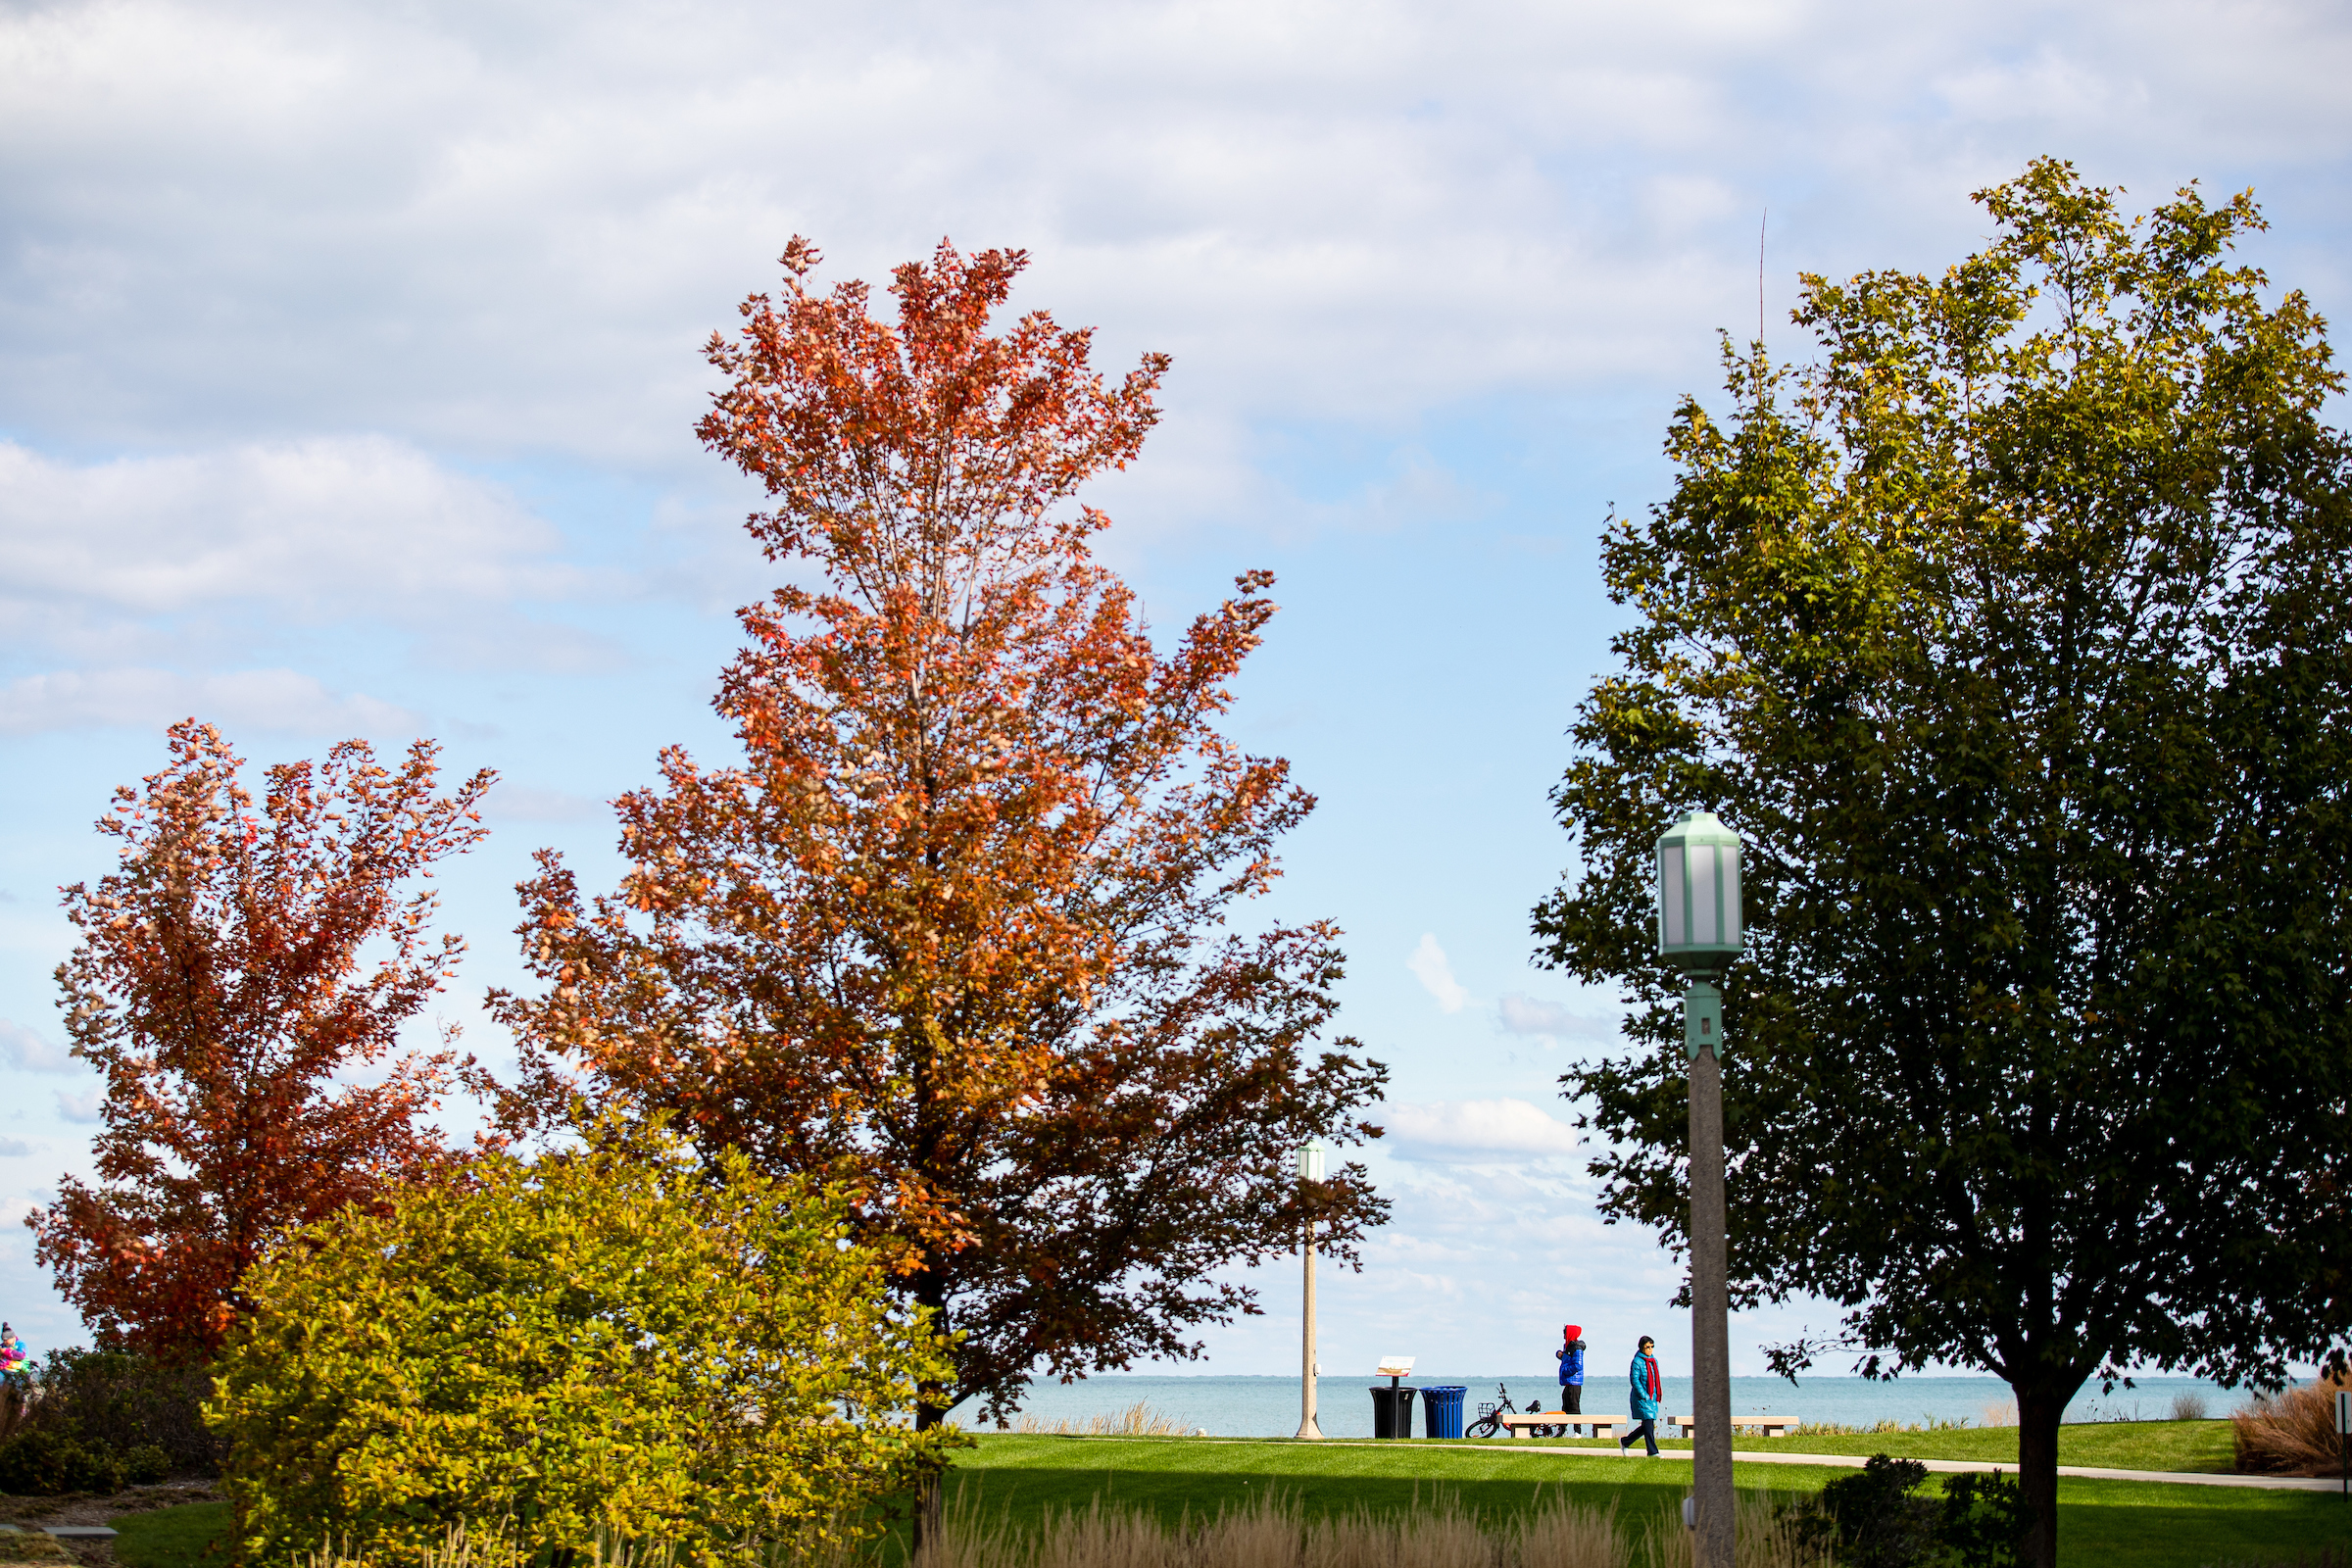 Loyola University Chicago, Lakeshore campus in the fall